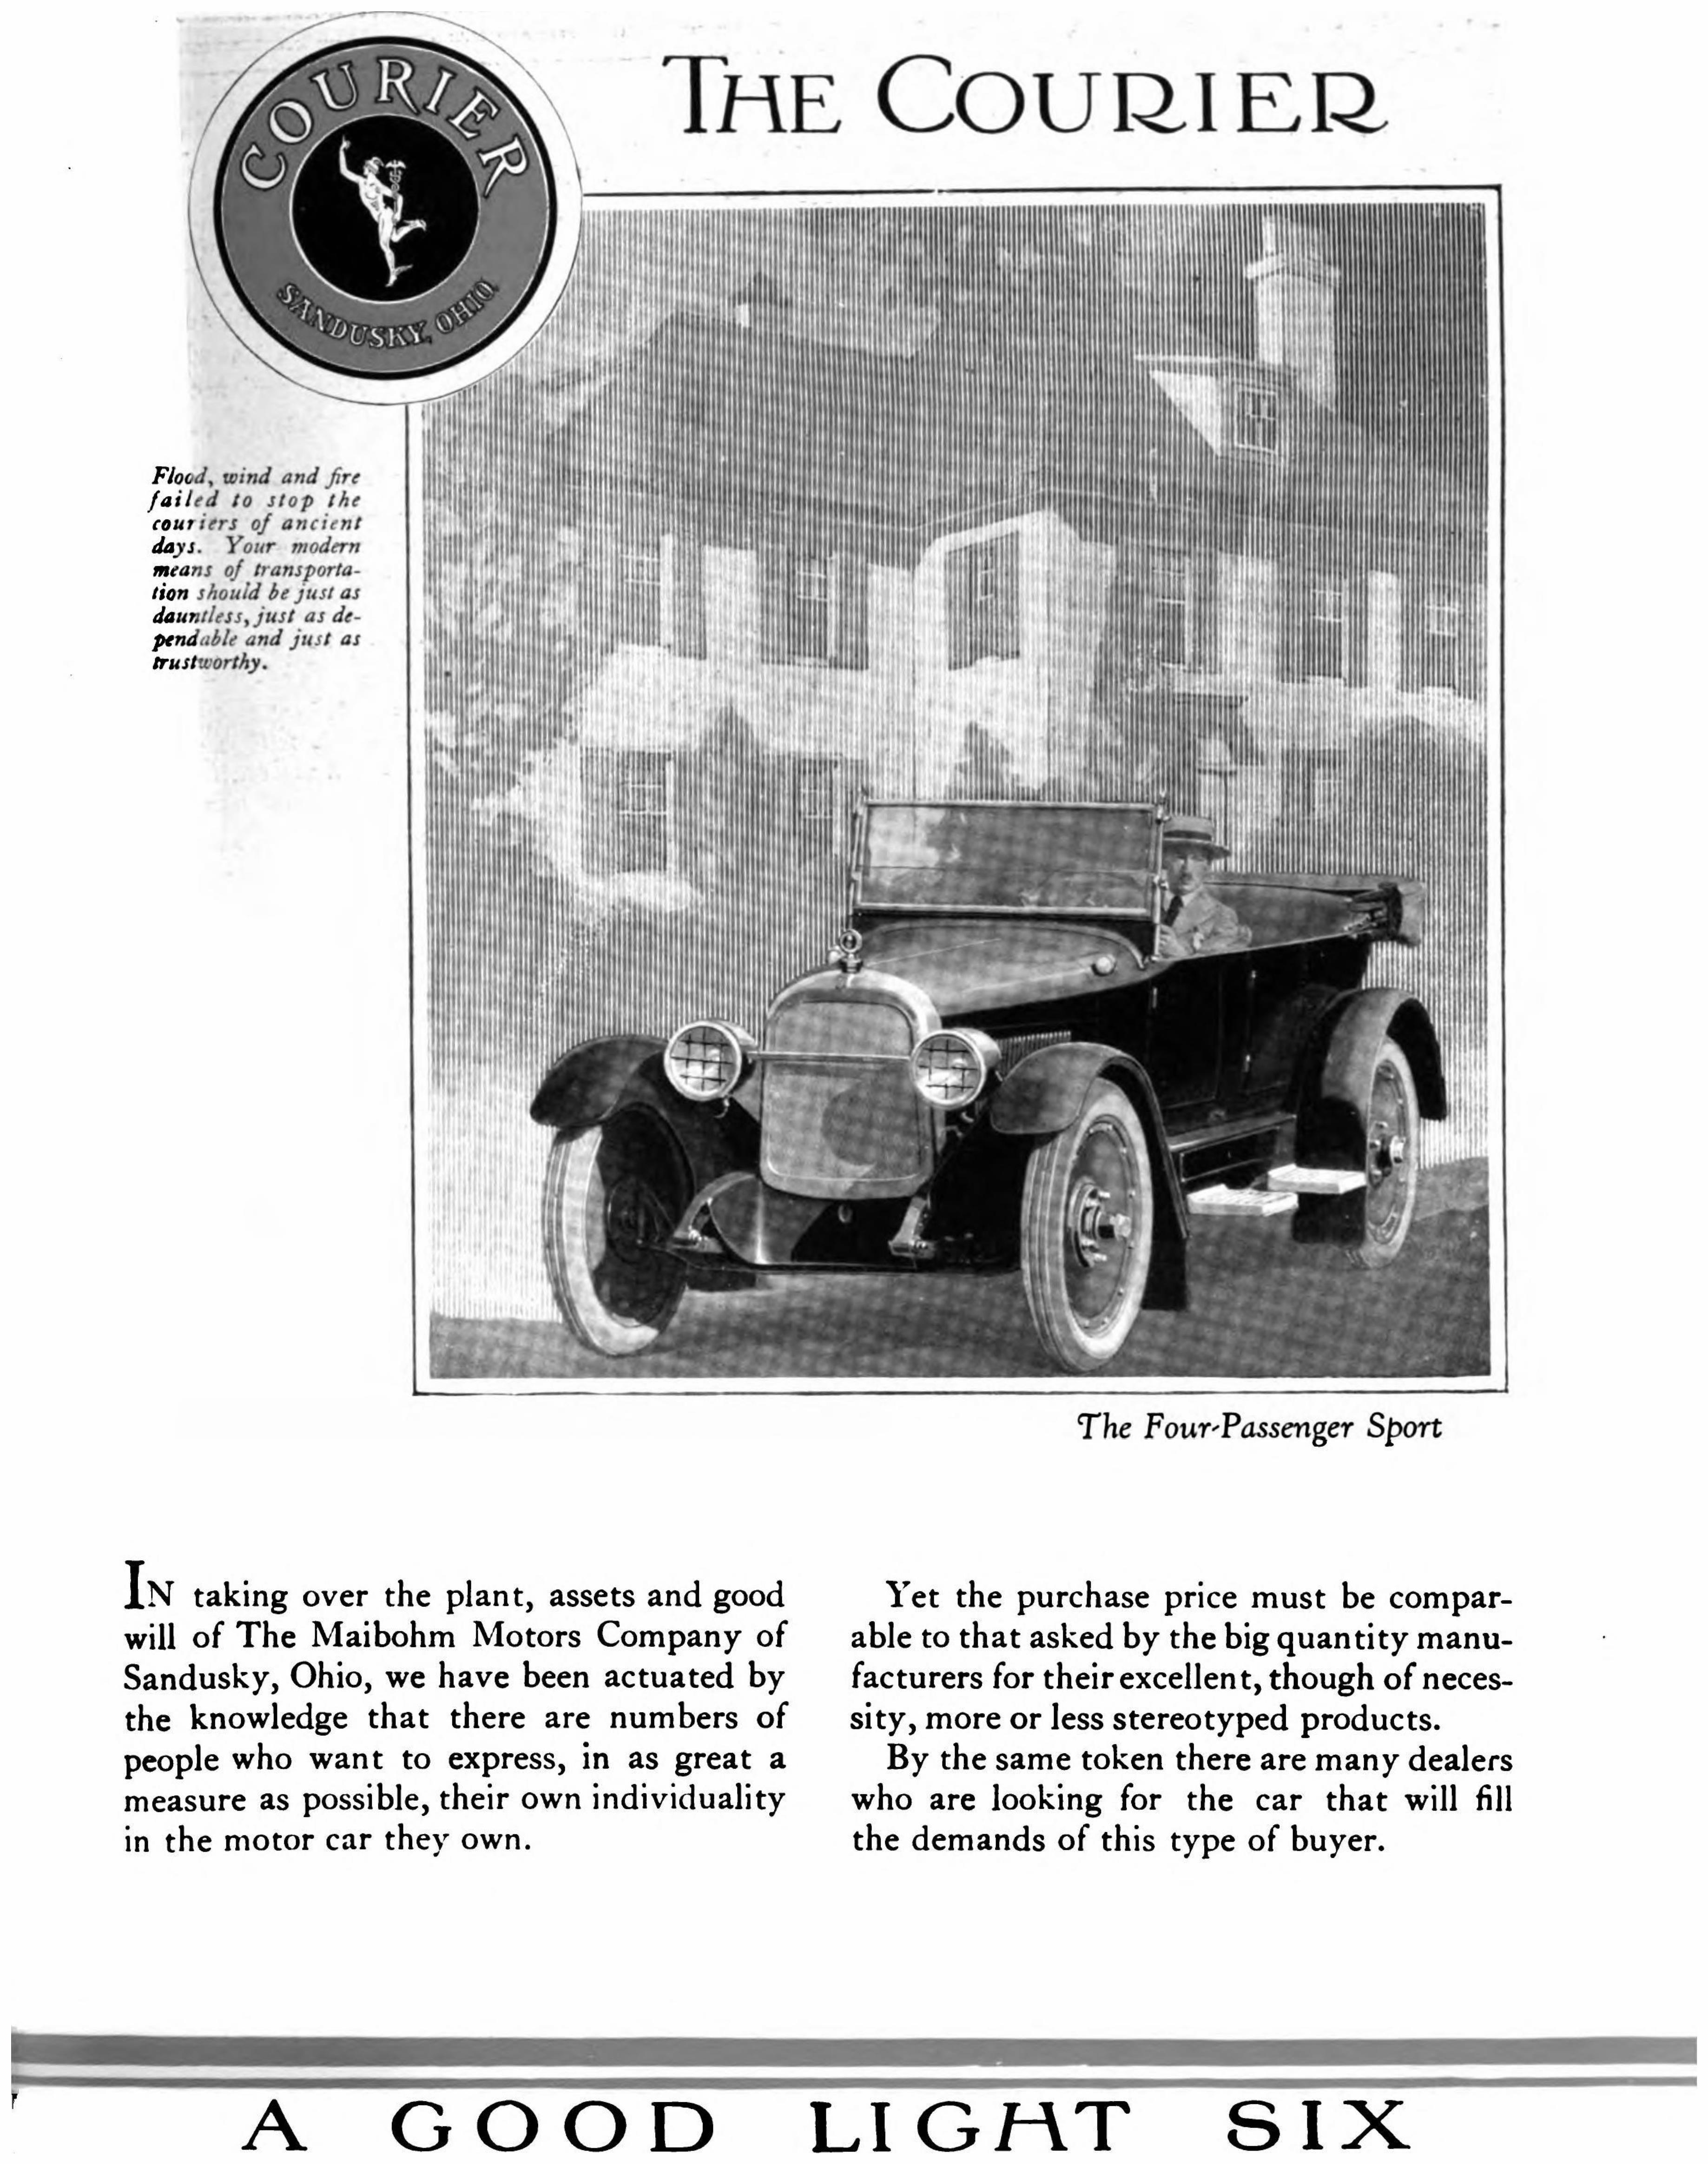 Courier 1922 30.jpg